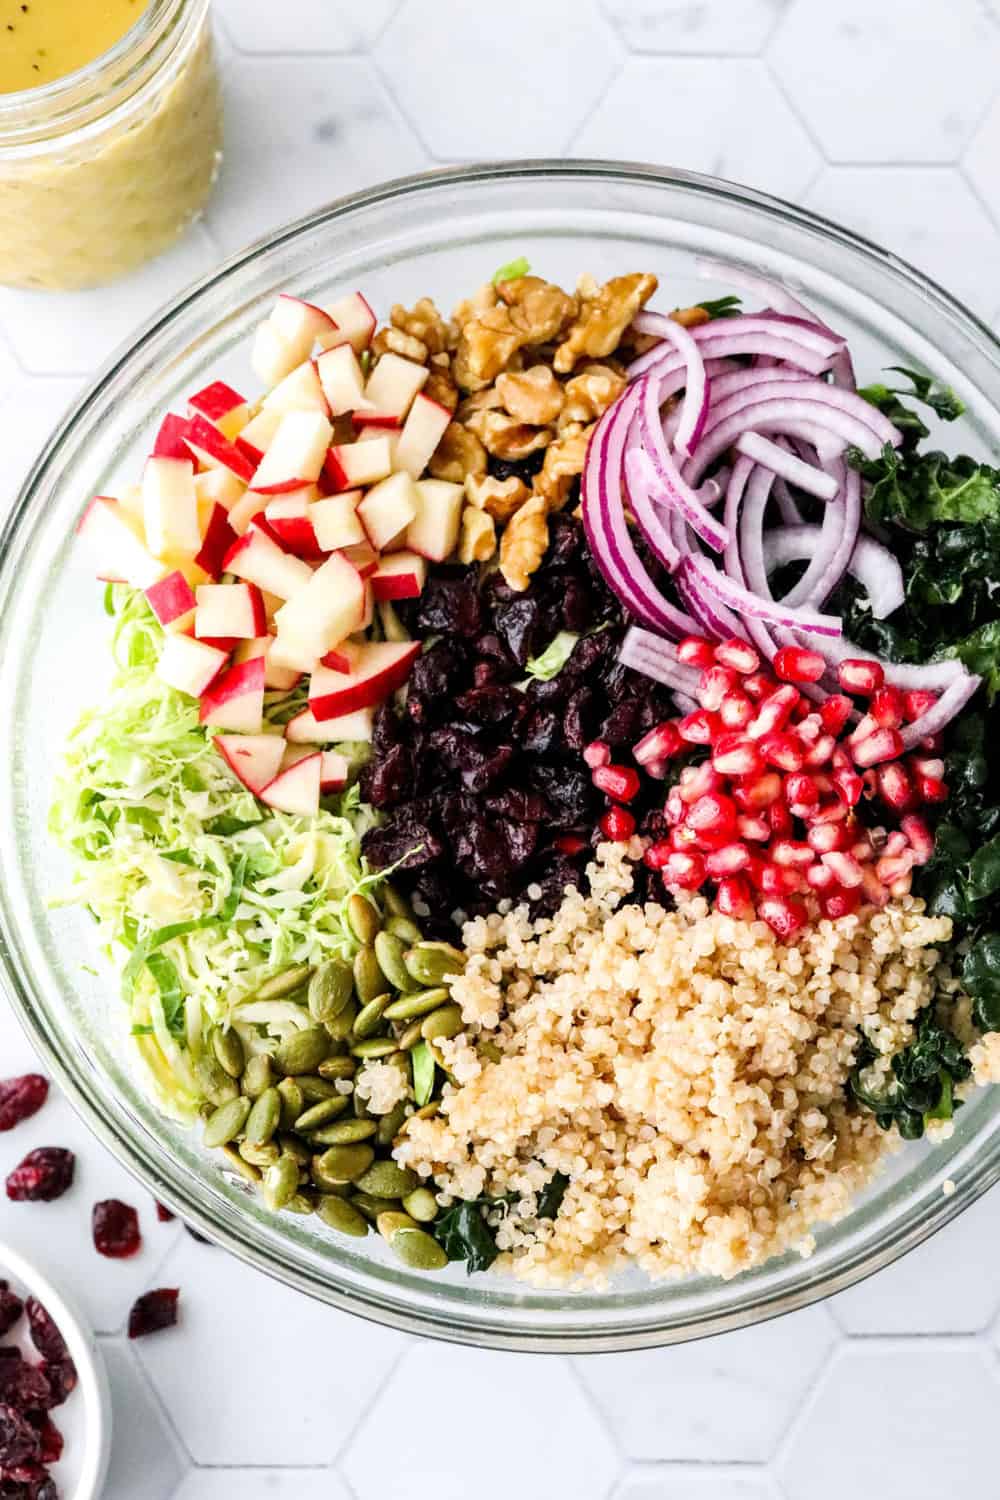 Must Make Chopped Kale Salad With Quinoa - Pinch Me Good